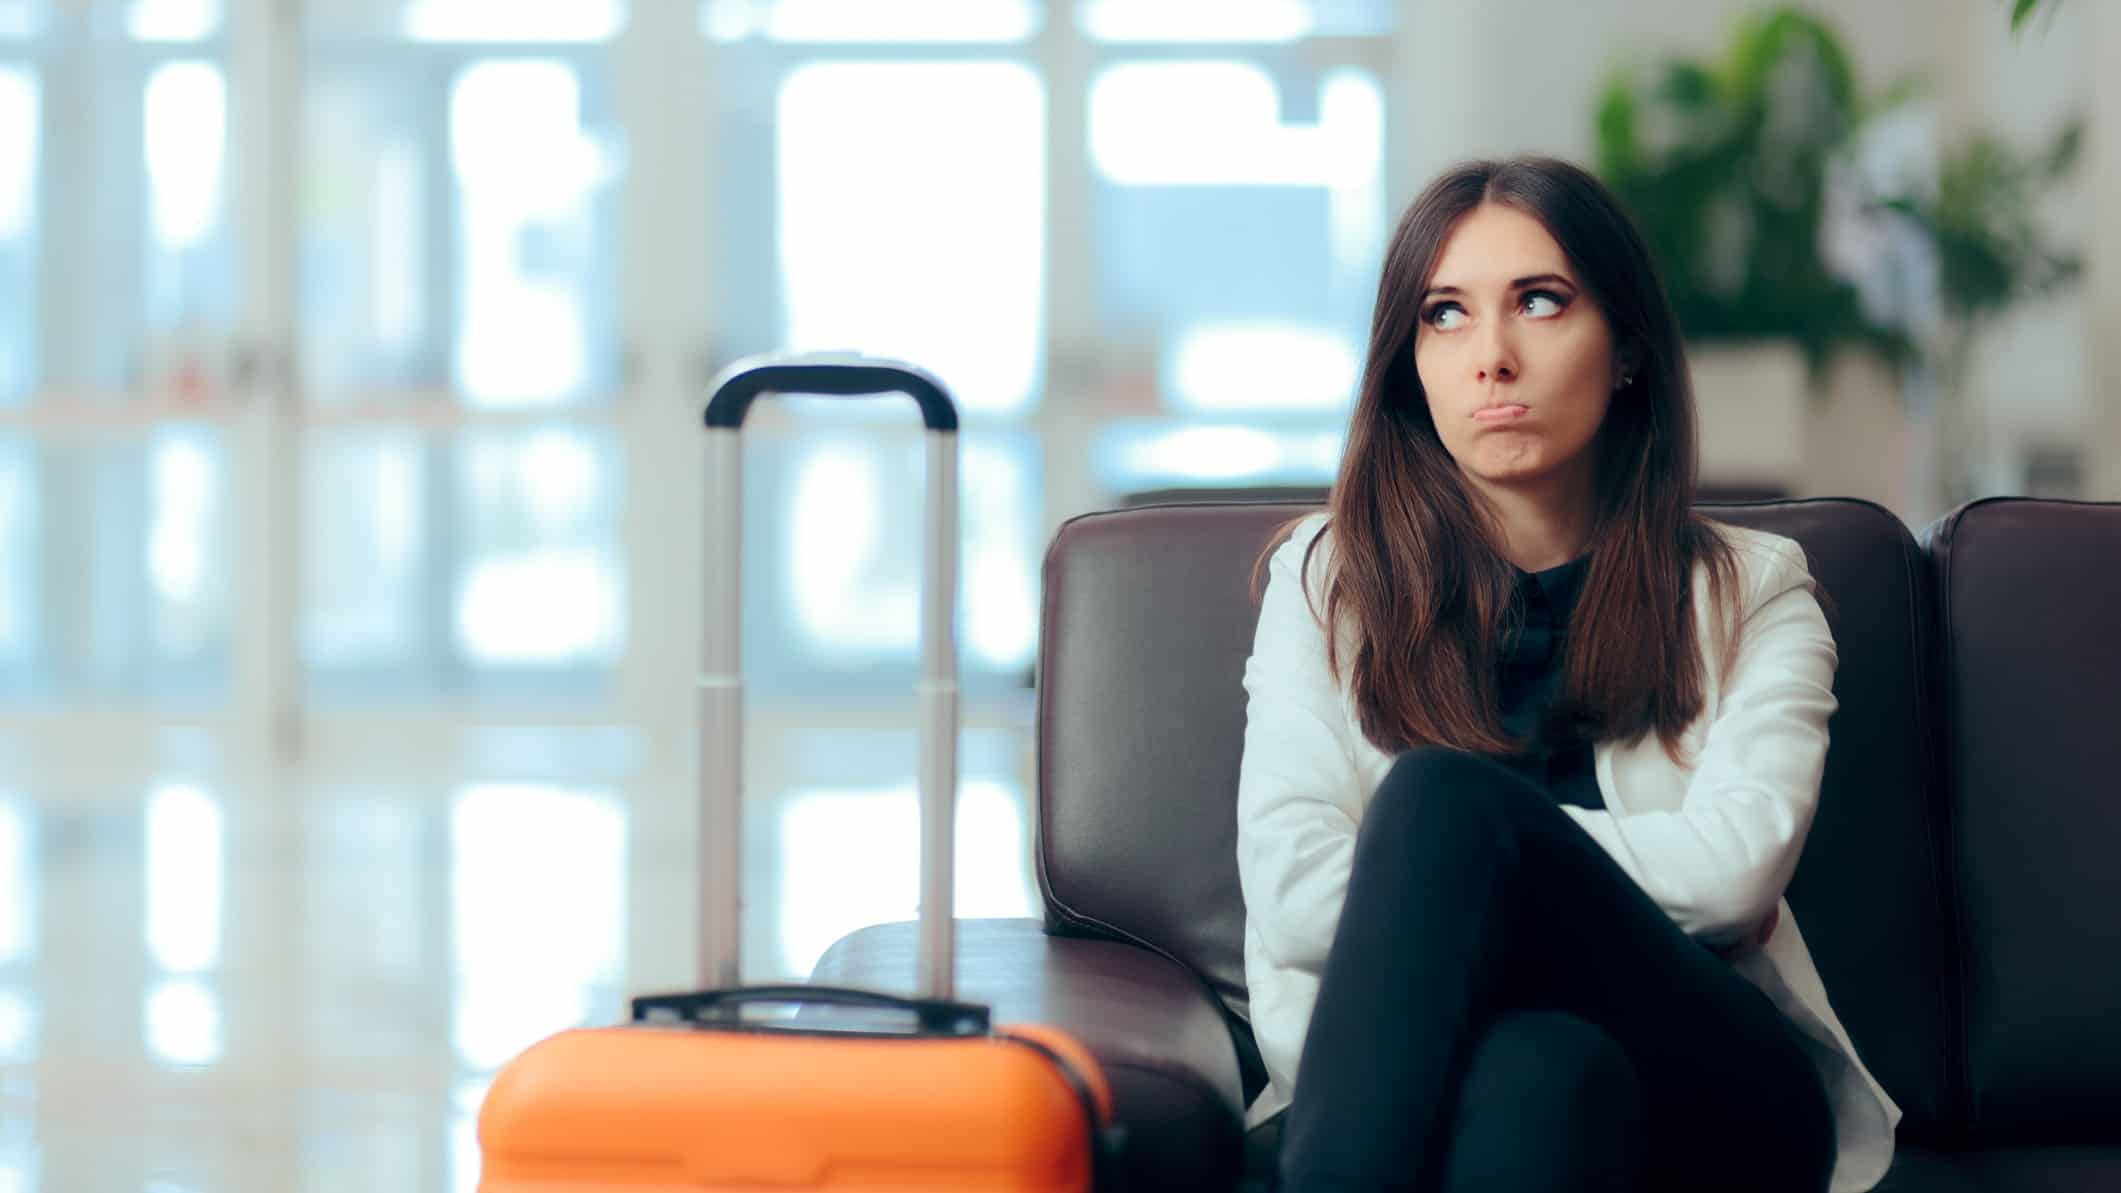 a woman sits next to her wheel along suitcase with the handle raised in a desserted airport with her arms folded and a frustrated, sad expression on her face.